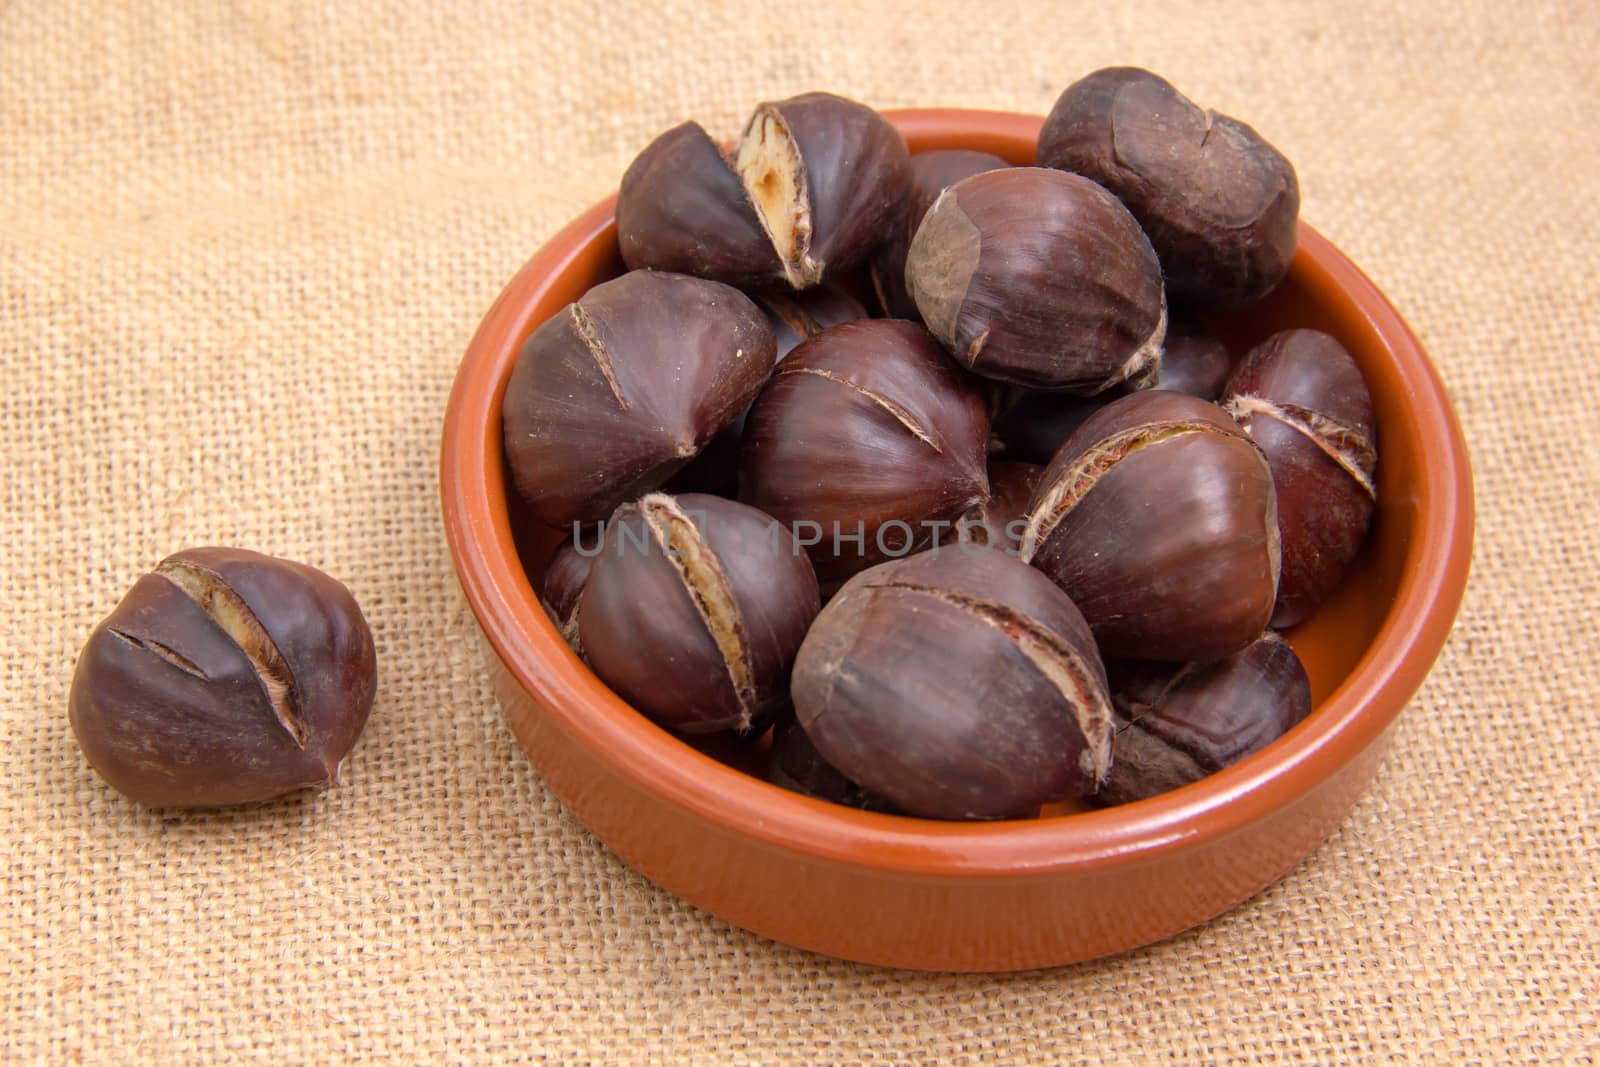 Roasted chestnuts in bowl on placemat jute